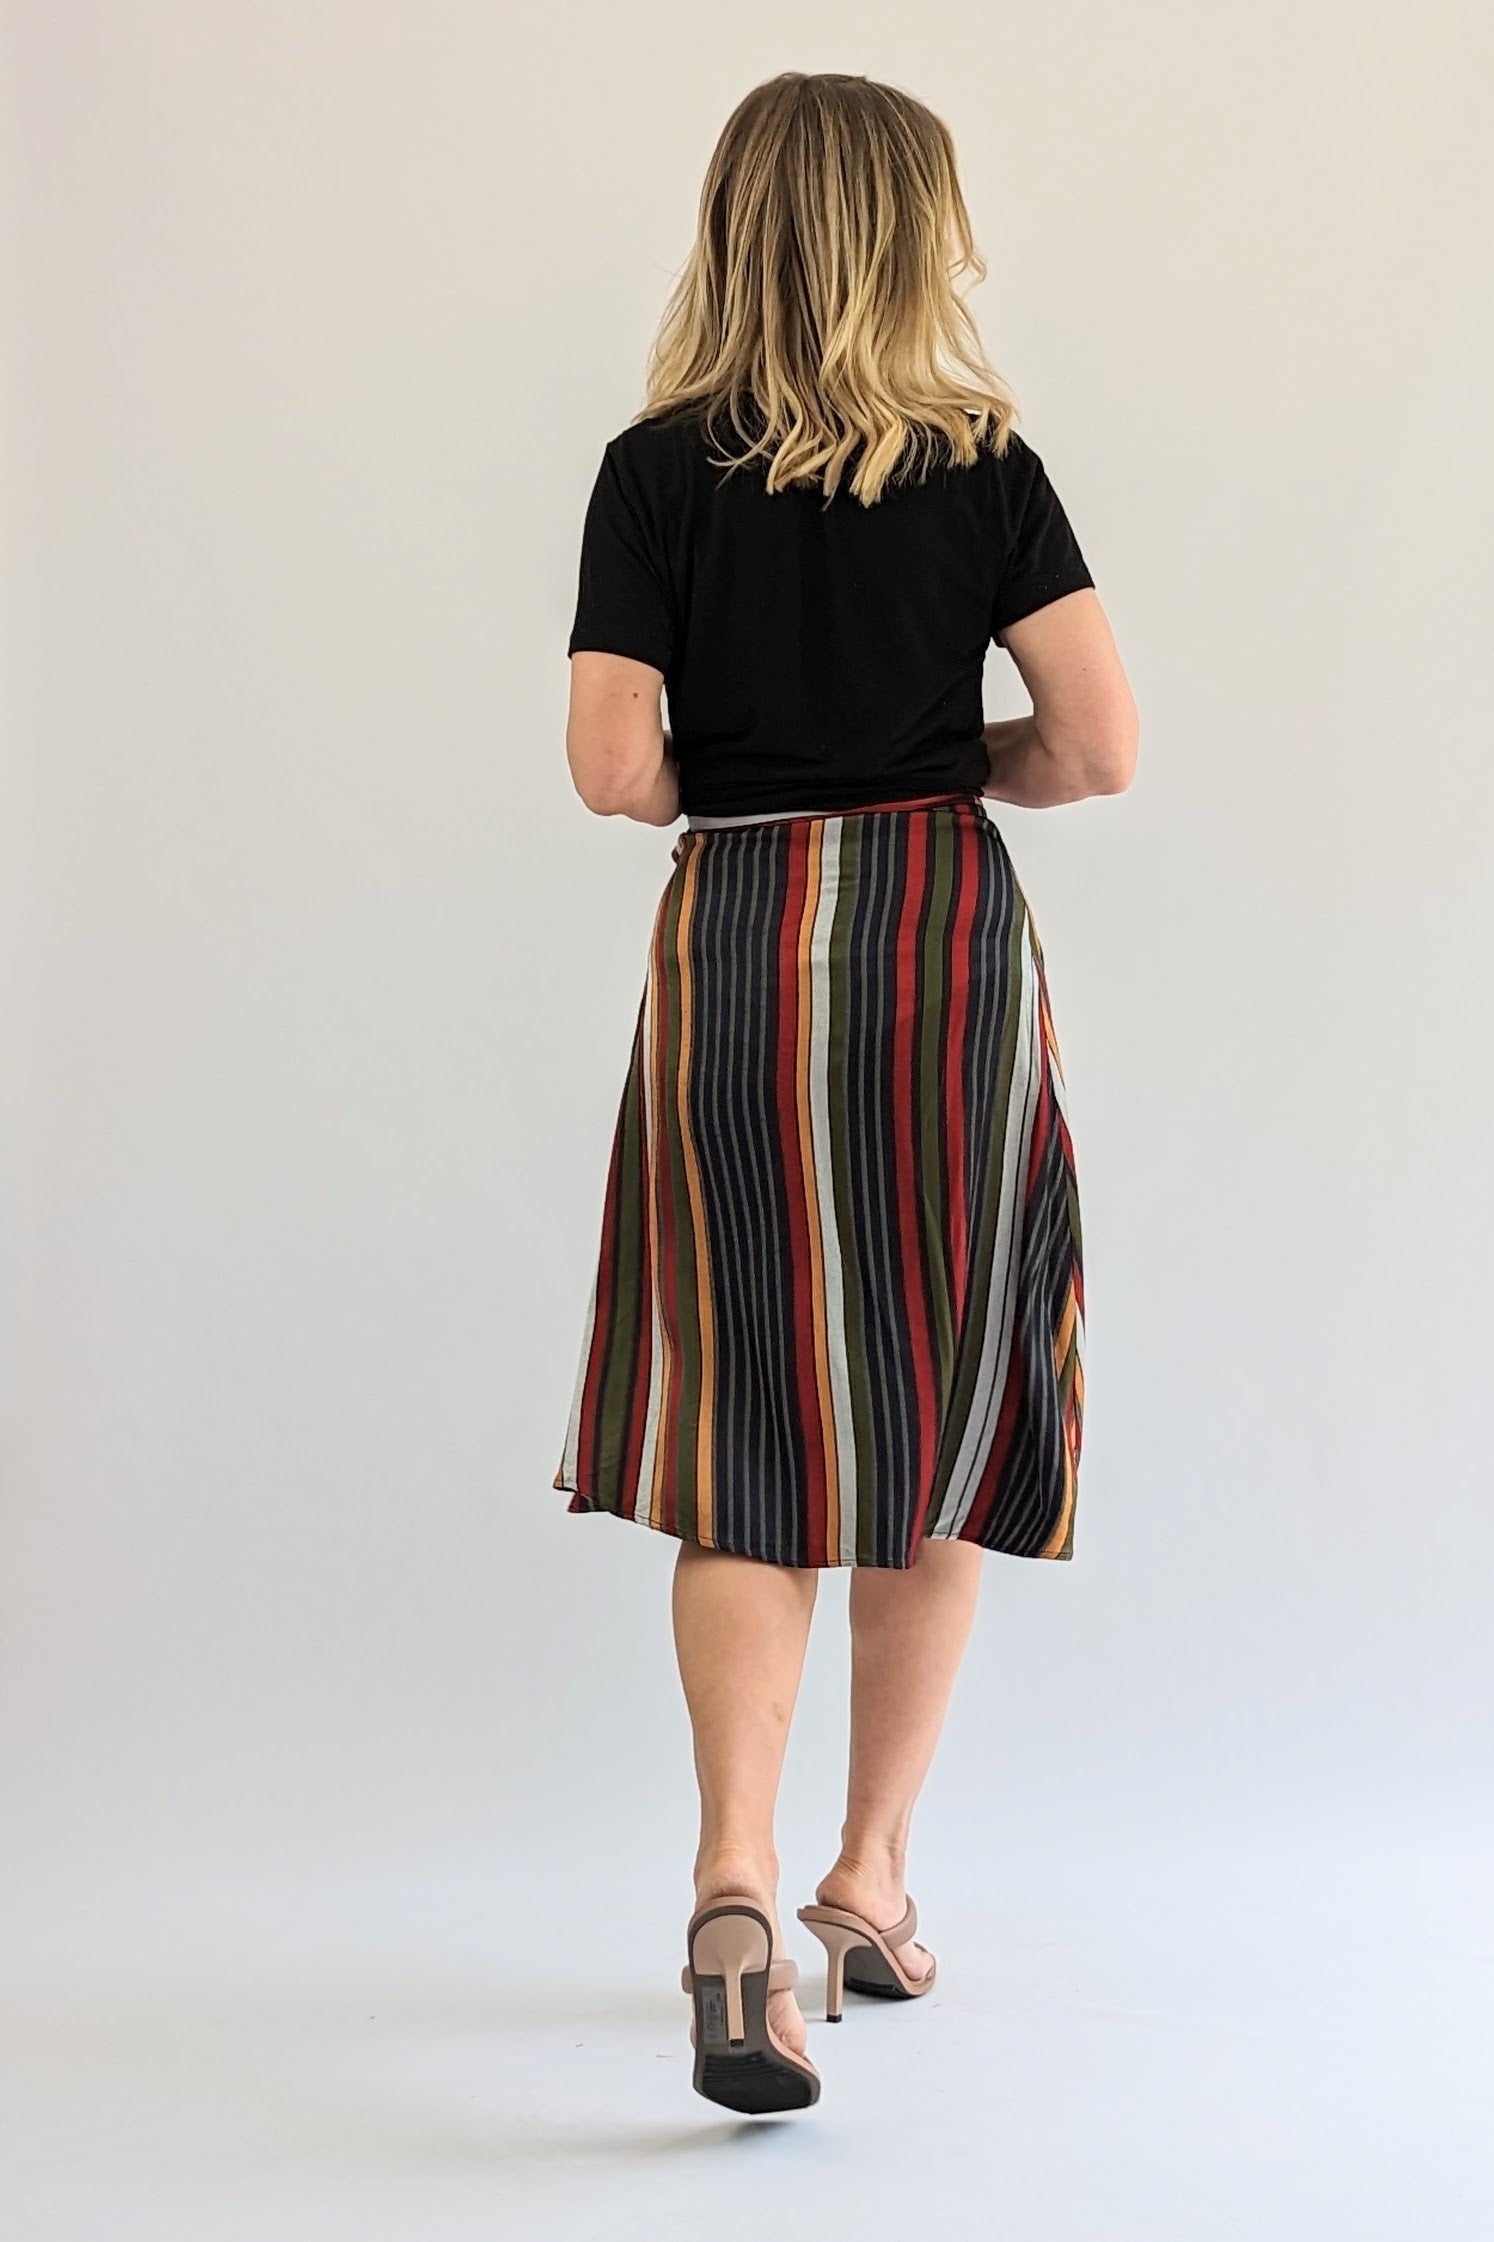 Vintage striped skirt with tie